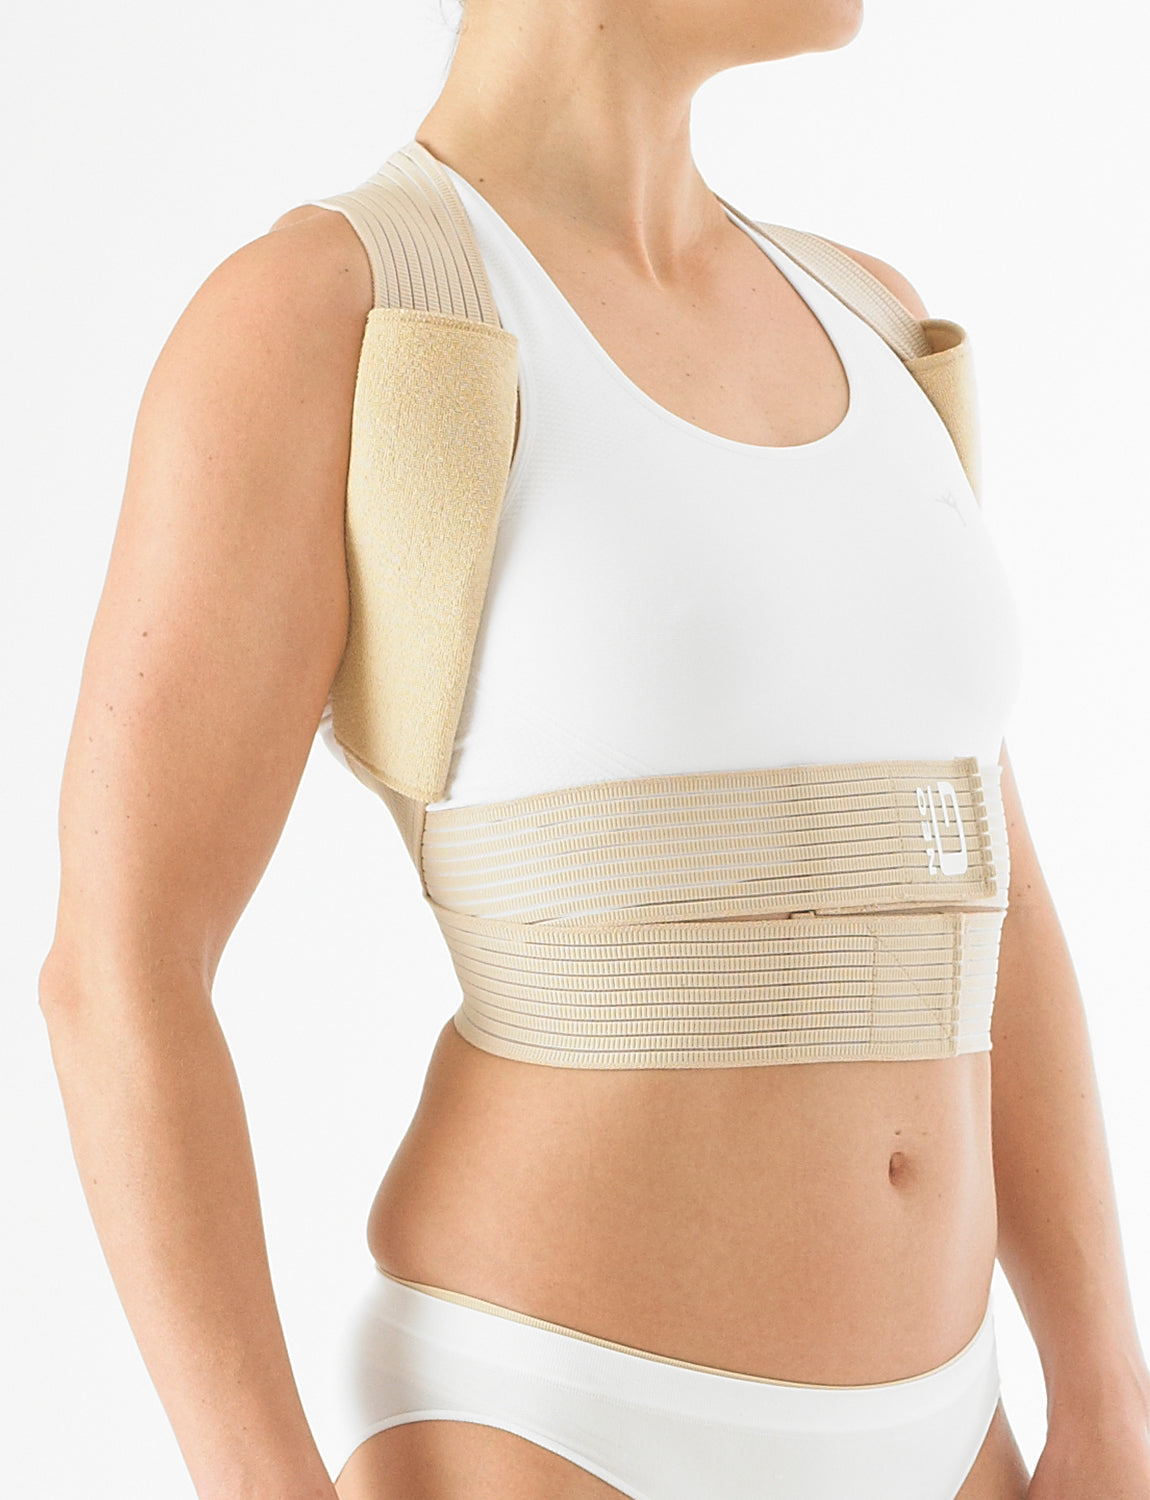 Back Posture Corrector Therapy Corset Spine Support Belt Lumbar Back  Posture Correction Bandage For Men Women Kid – iFirst